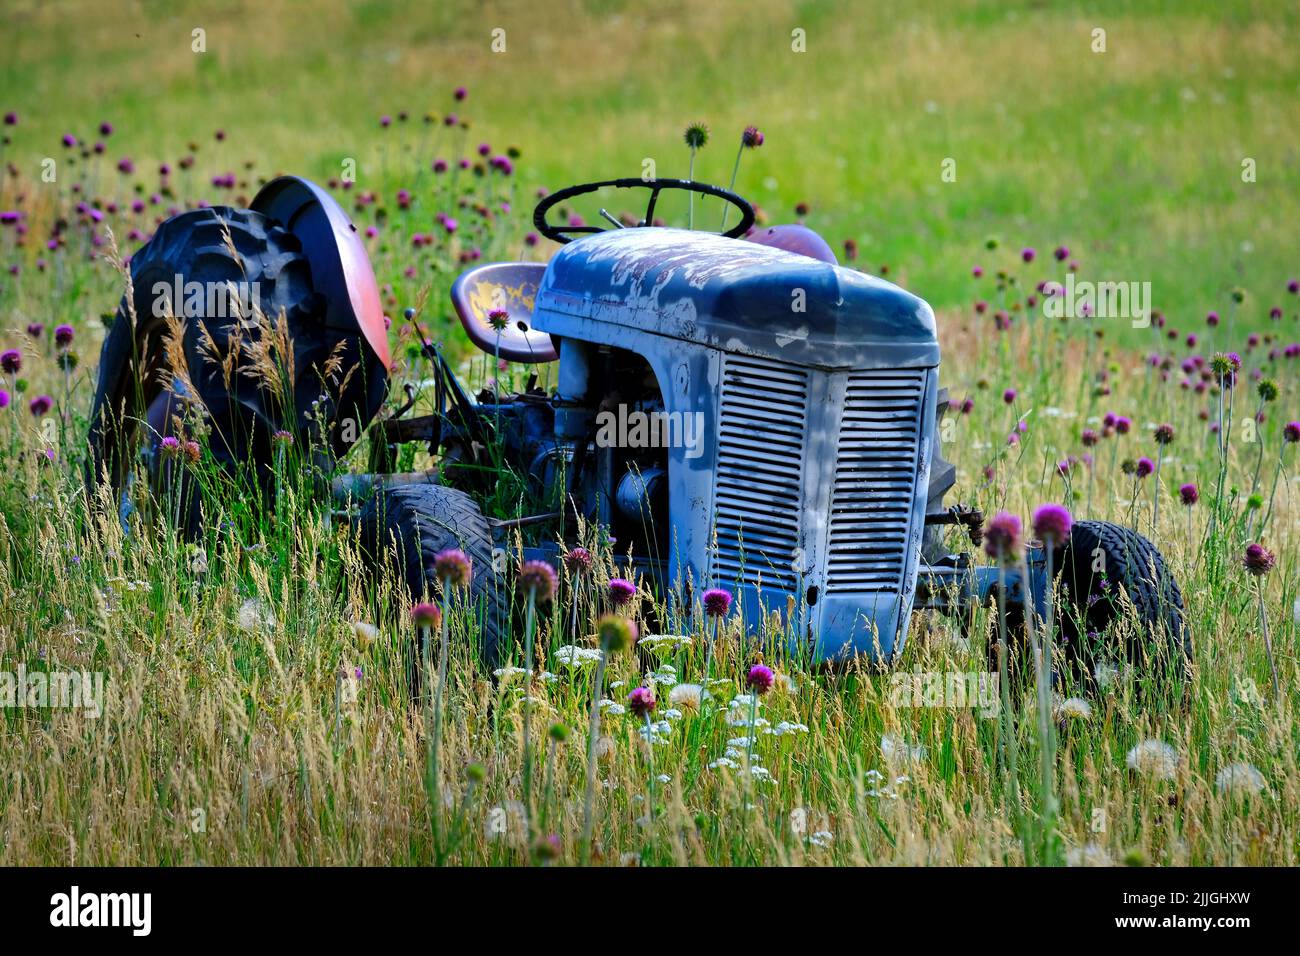 Old red tractor in field with flowers abandoned as antique vintage farm machine Stock Photo